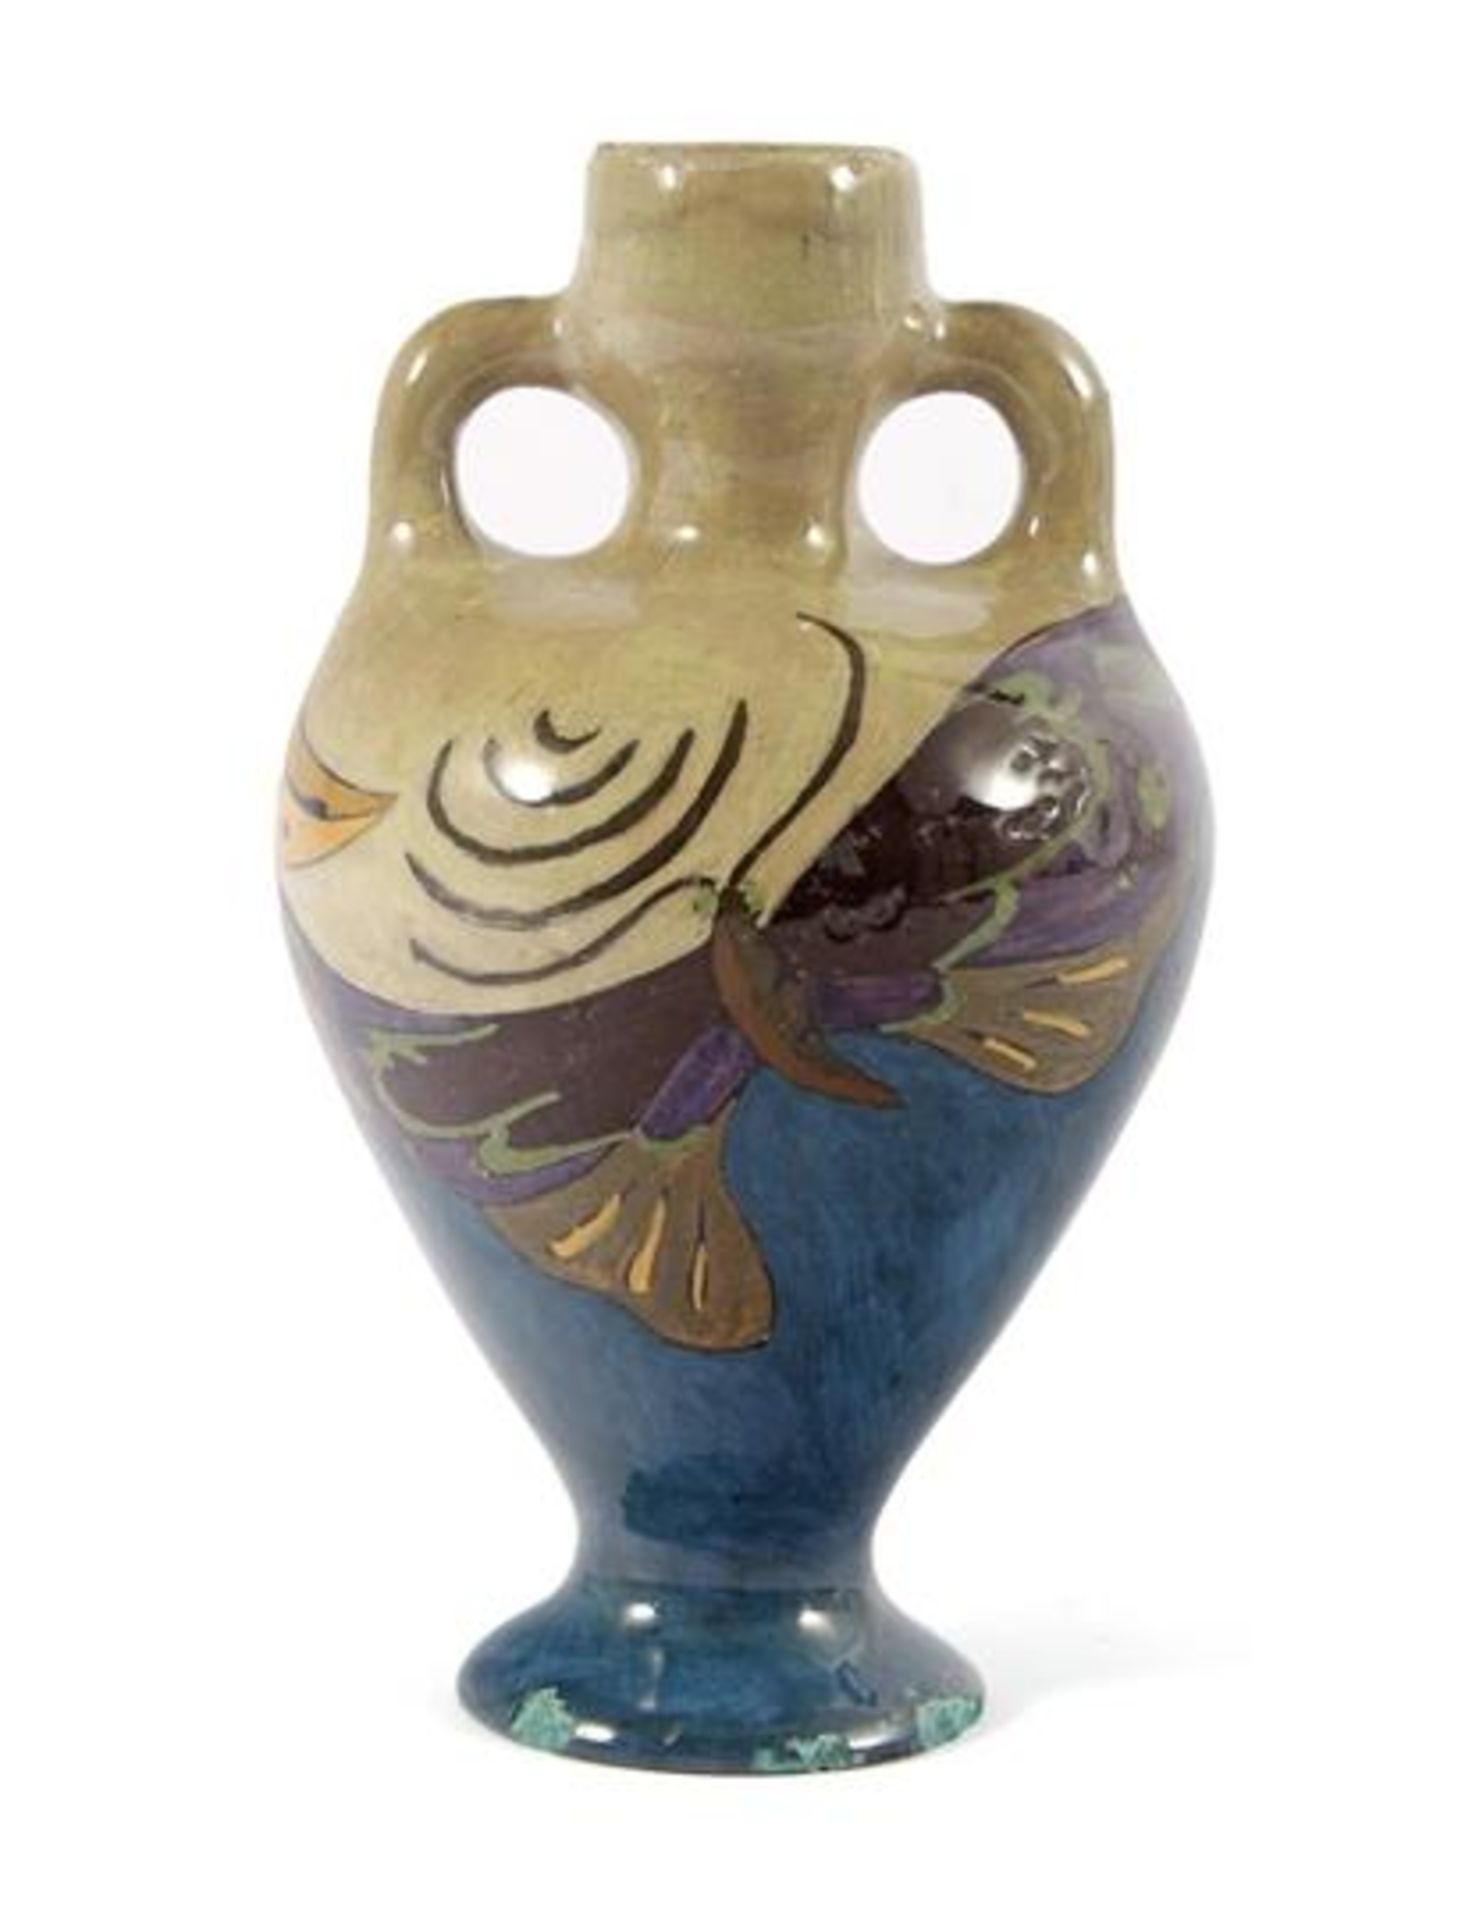 Rozenburg Den Haag ceramic ears vase with butterfly decoration 15 cm high (damage to the base ring - Image 2 of 5